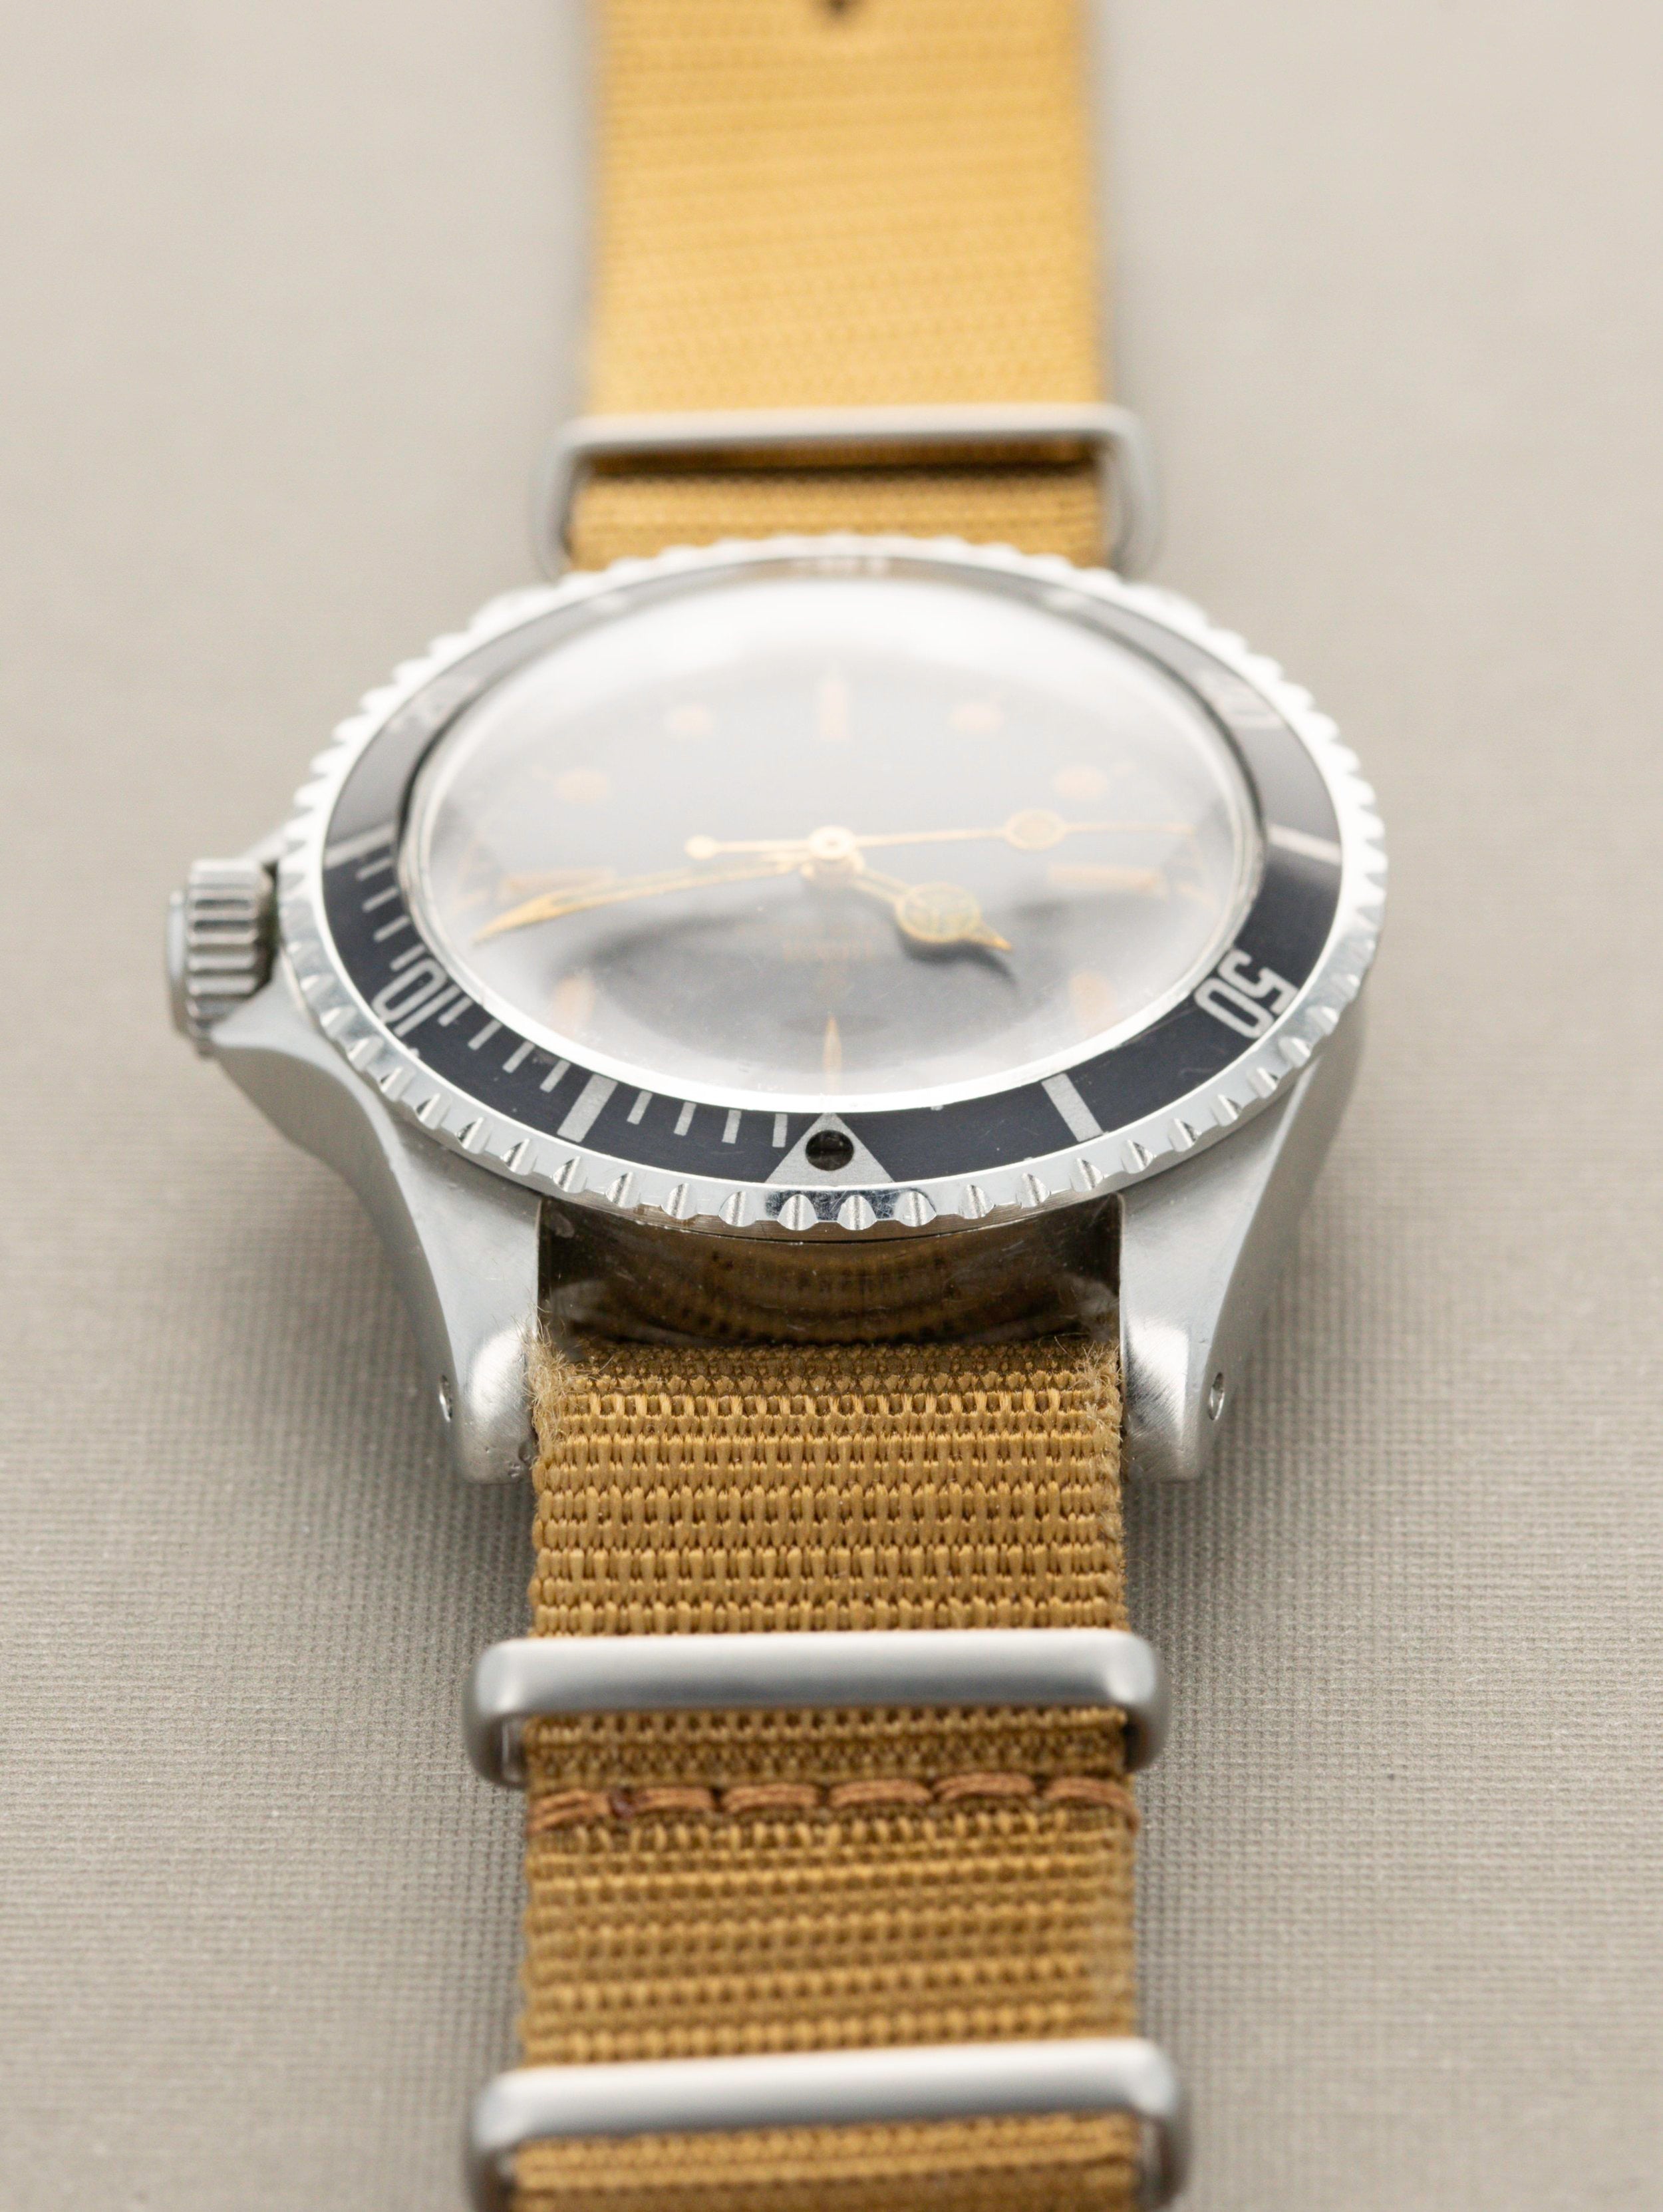 Tudor Submariner Ref. 7928 - Pointed Crown Guards, Exclamation Point